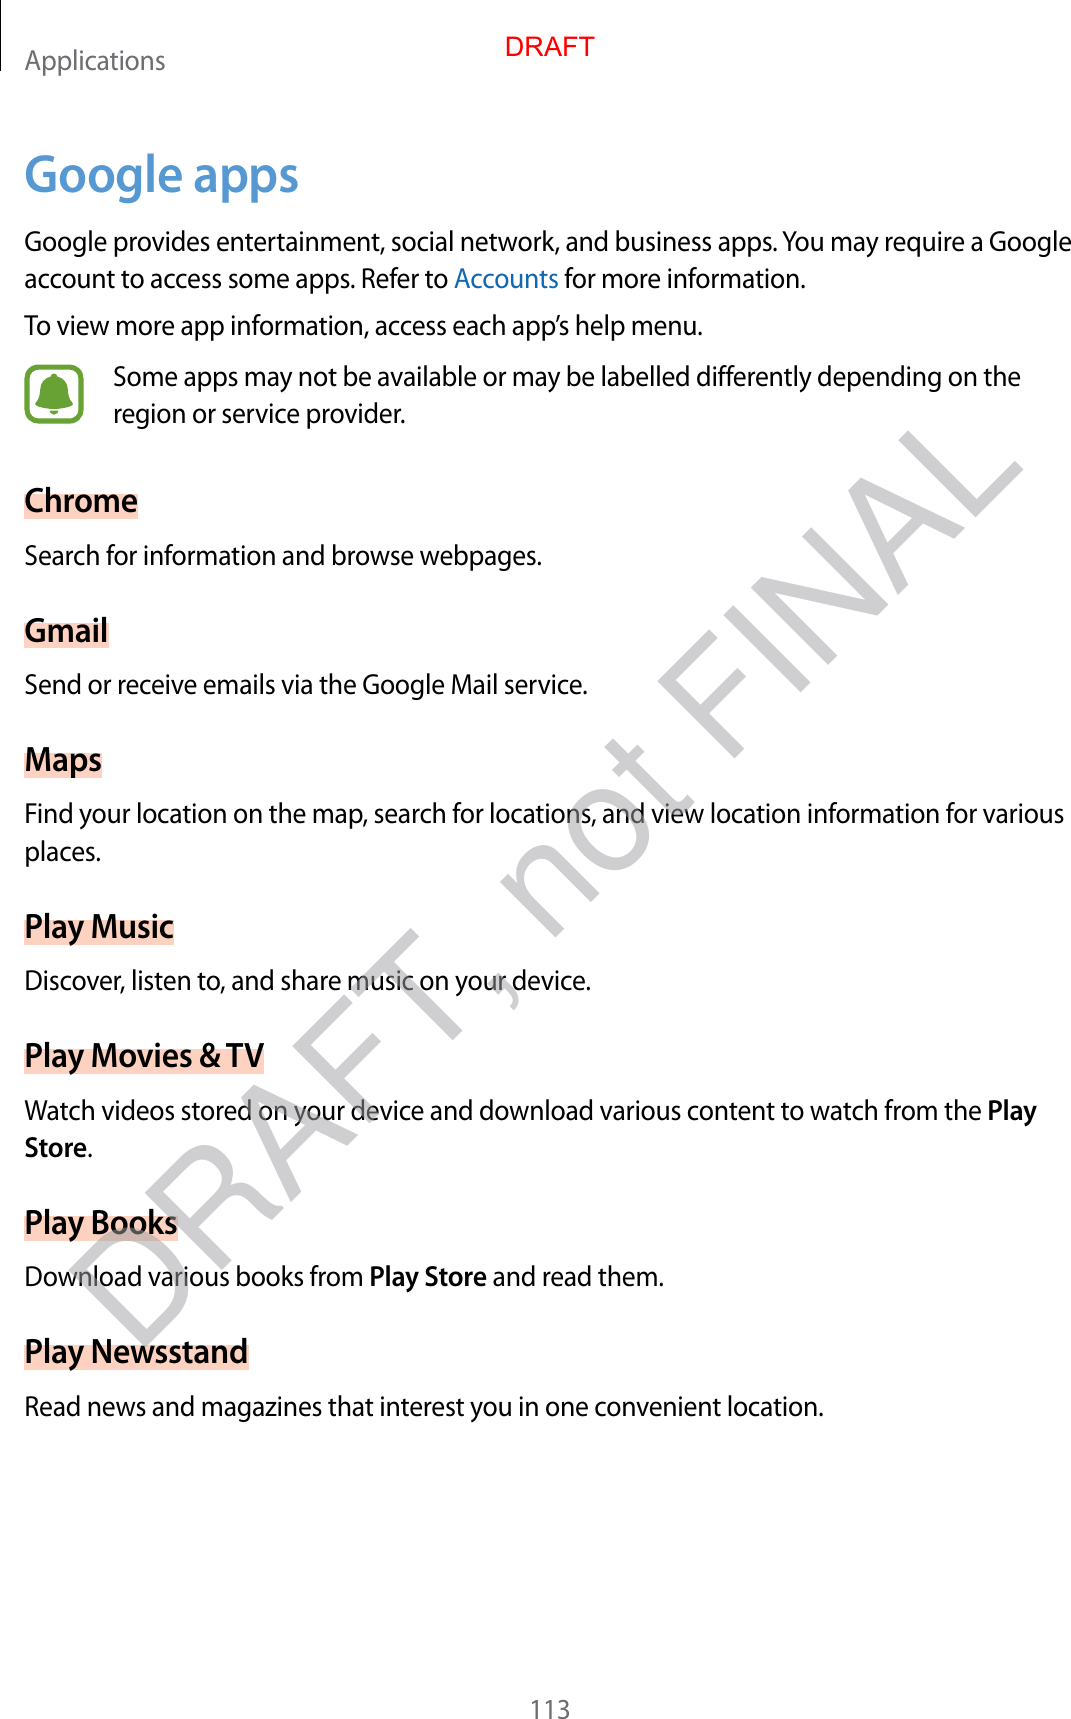 Applications113Google appsGoogle provides entertainment, social network, and business apps. You may require a Google account to access some apps. Refer to Accounts for more information.To view more app information, access each app’s help menu.Some apps may not be available or may be labelled differently depending on the region or service provider.ChromeSearch for information and browse webpages.GmailSend or receive emails via the Google Mail service.MapsFind your location on the map, search for locations, and view location information for various places.Play MusicDiscover, listen to, and share music on your device.Play Movies &amp; TVWatch videos stored on your device and download various content to watch from the Play Store.Play BooksDownload various books from Play Store and read them.Play NewsstandRead news and magazines that interest you in one convenient location.DRAFTDRAFT, not FINAL